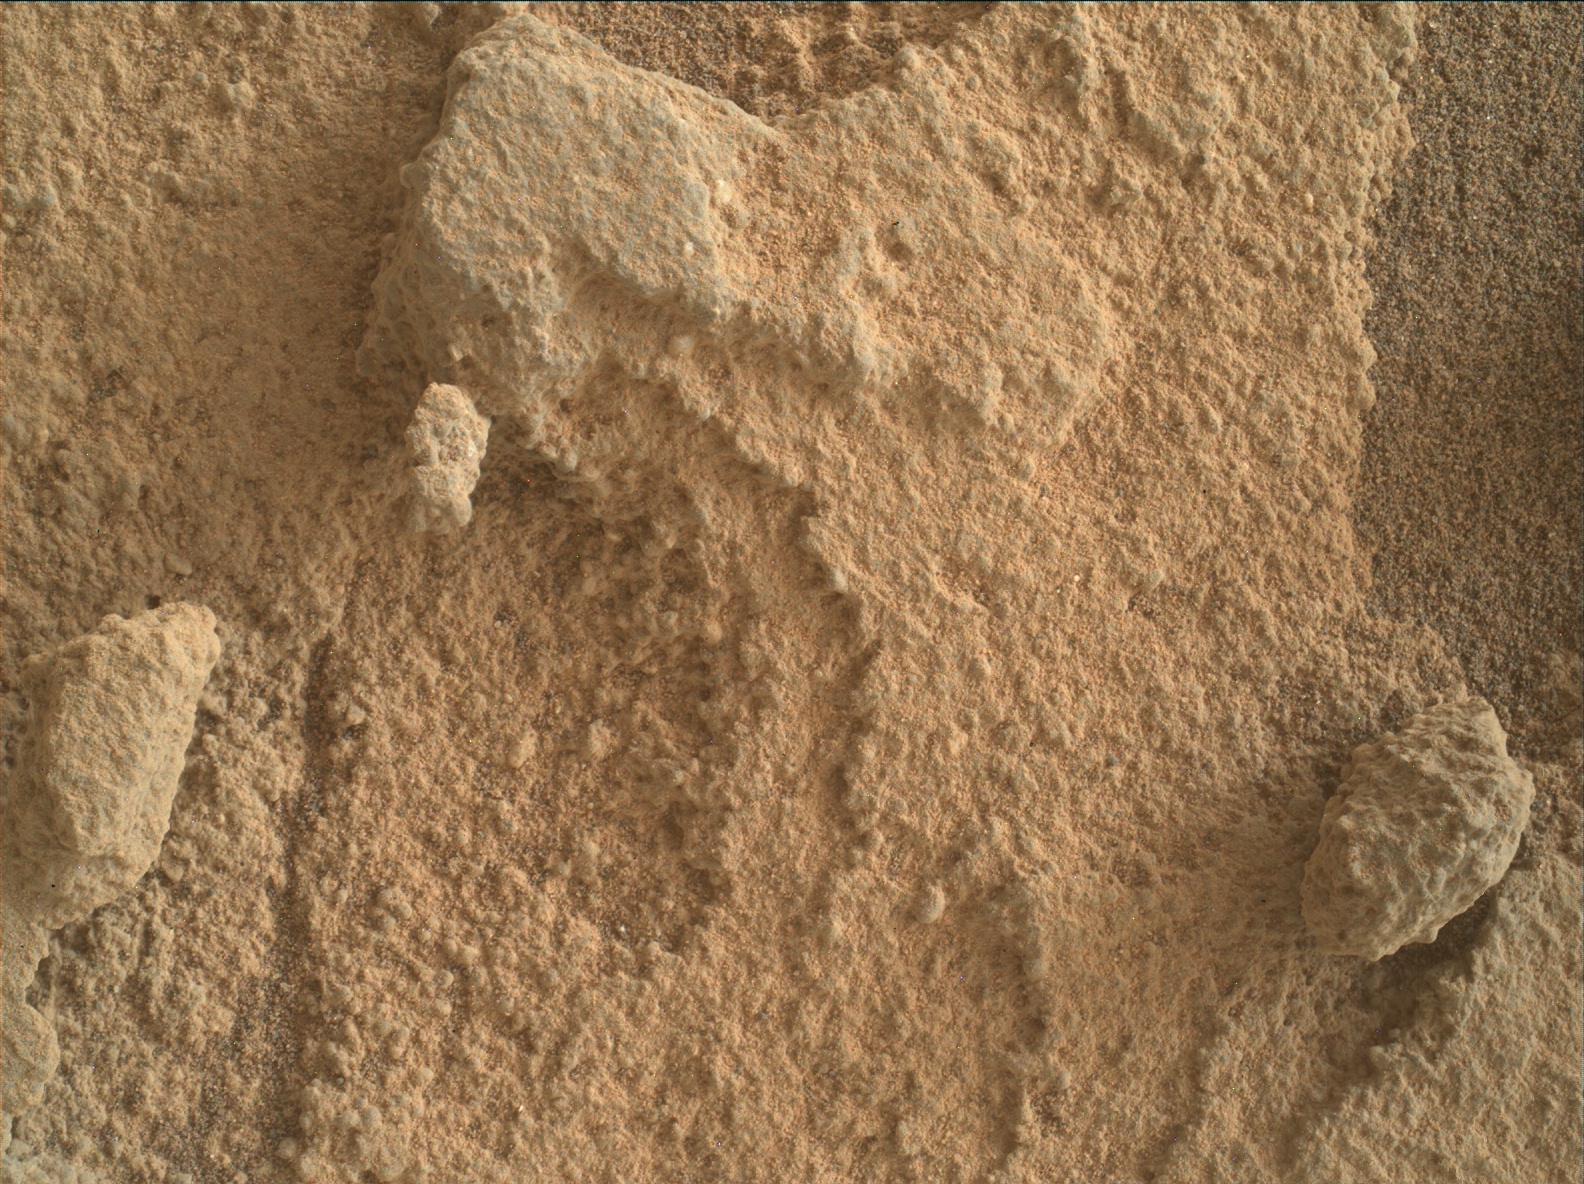 Nasa's Mars rover Curiosity acquired this image using its Mars Hand Lens Imager (MAHLI) on Sol 2736